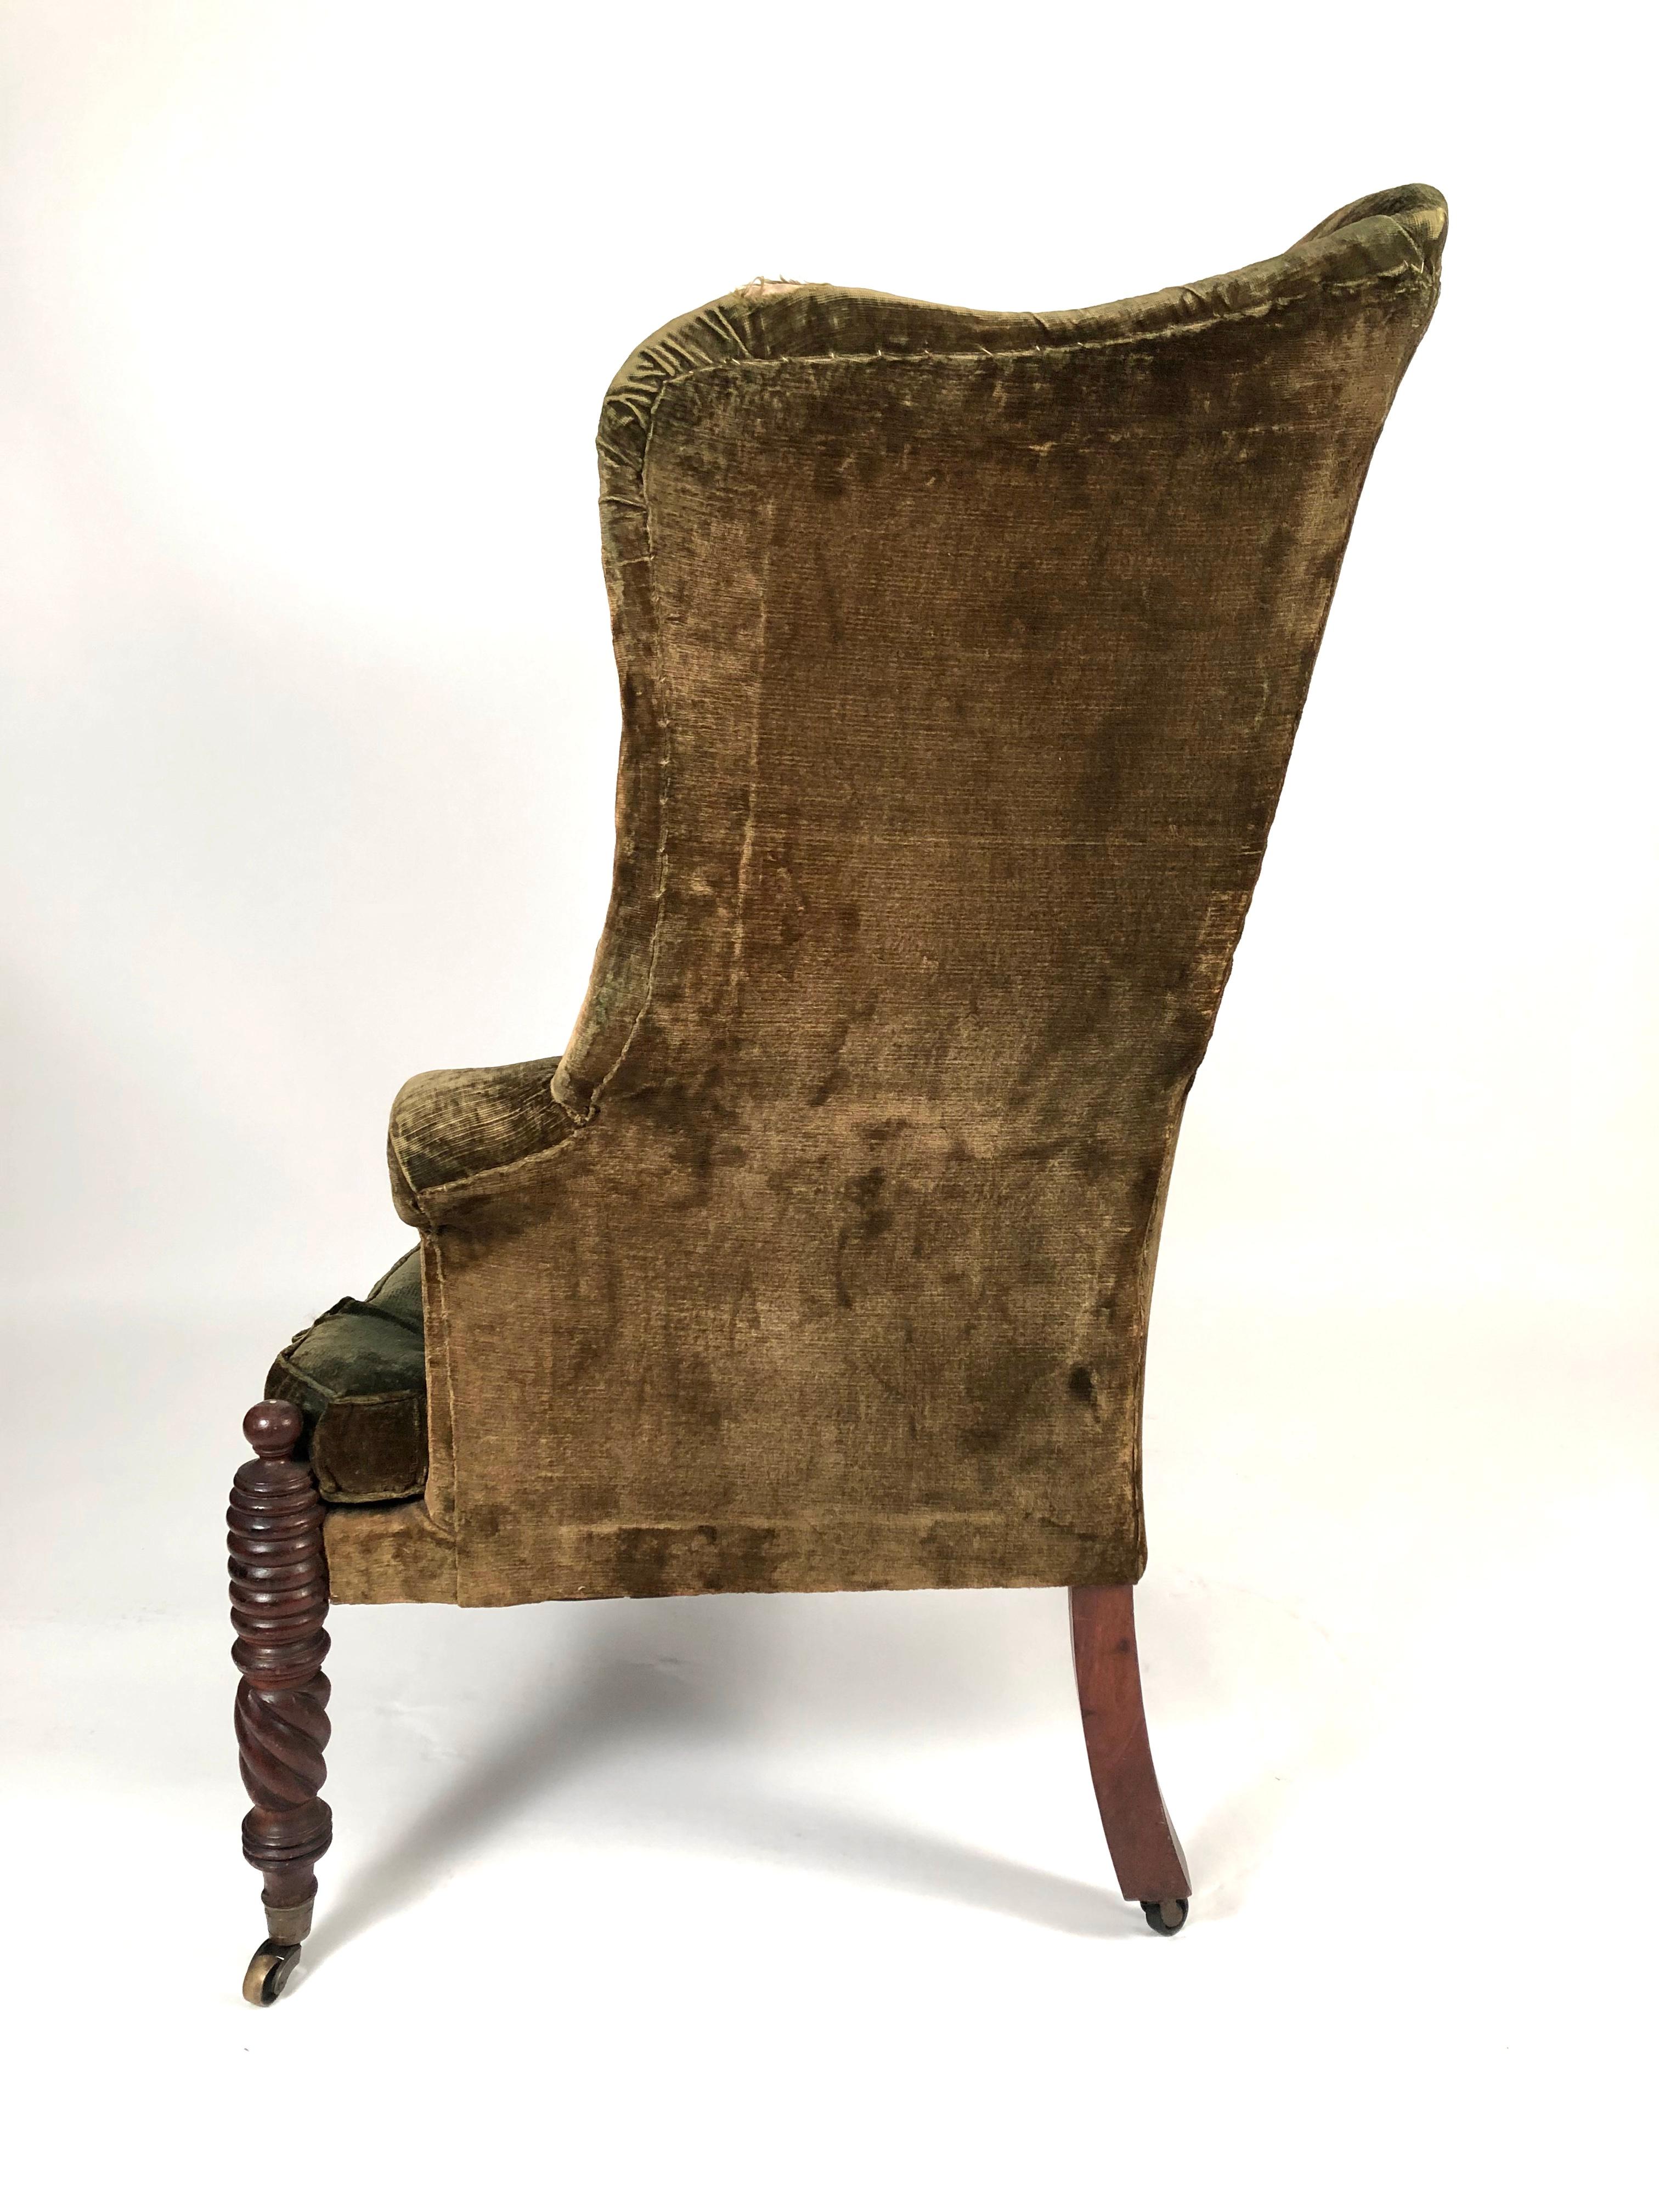 Carved American Federal Period Wingback Chair from Portsmouth, New Hampshire